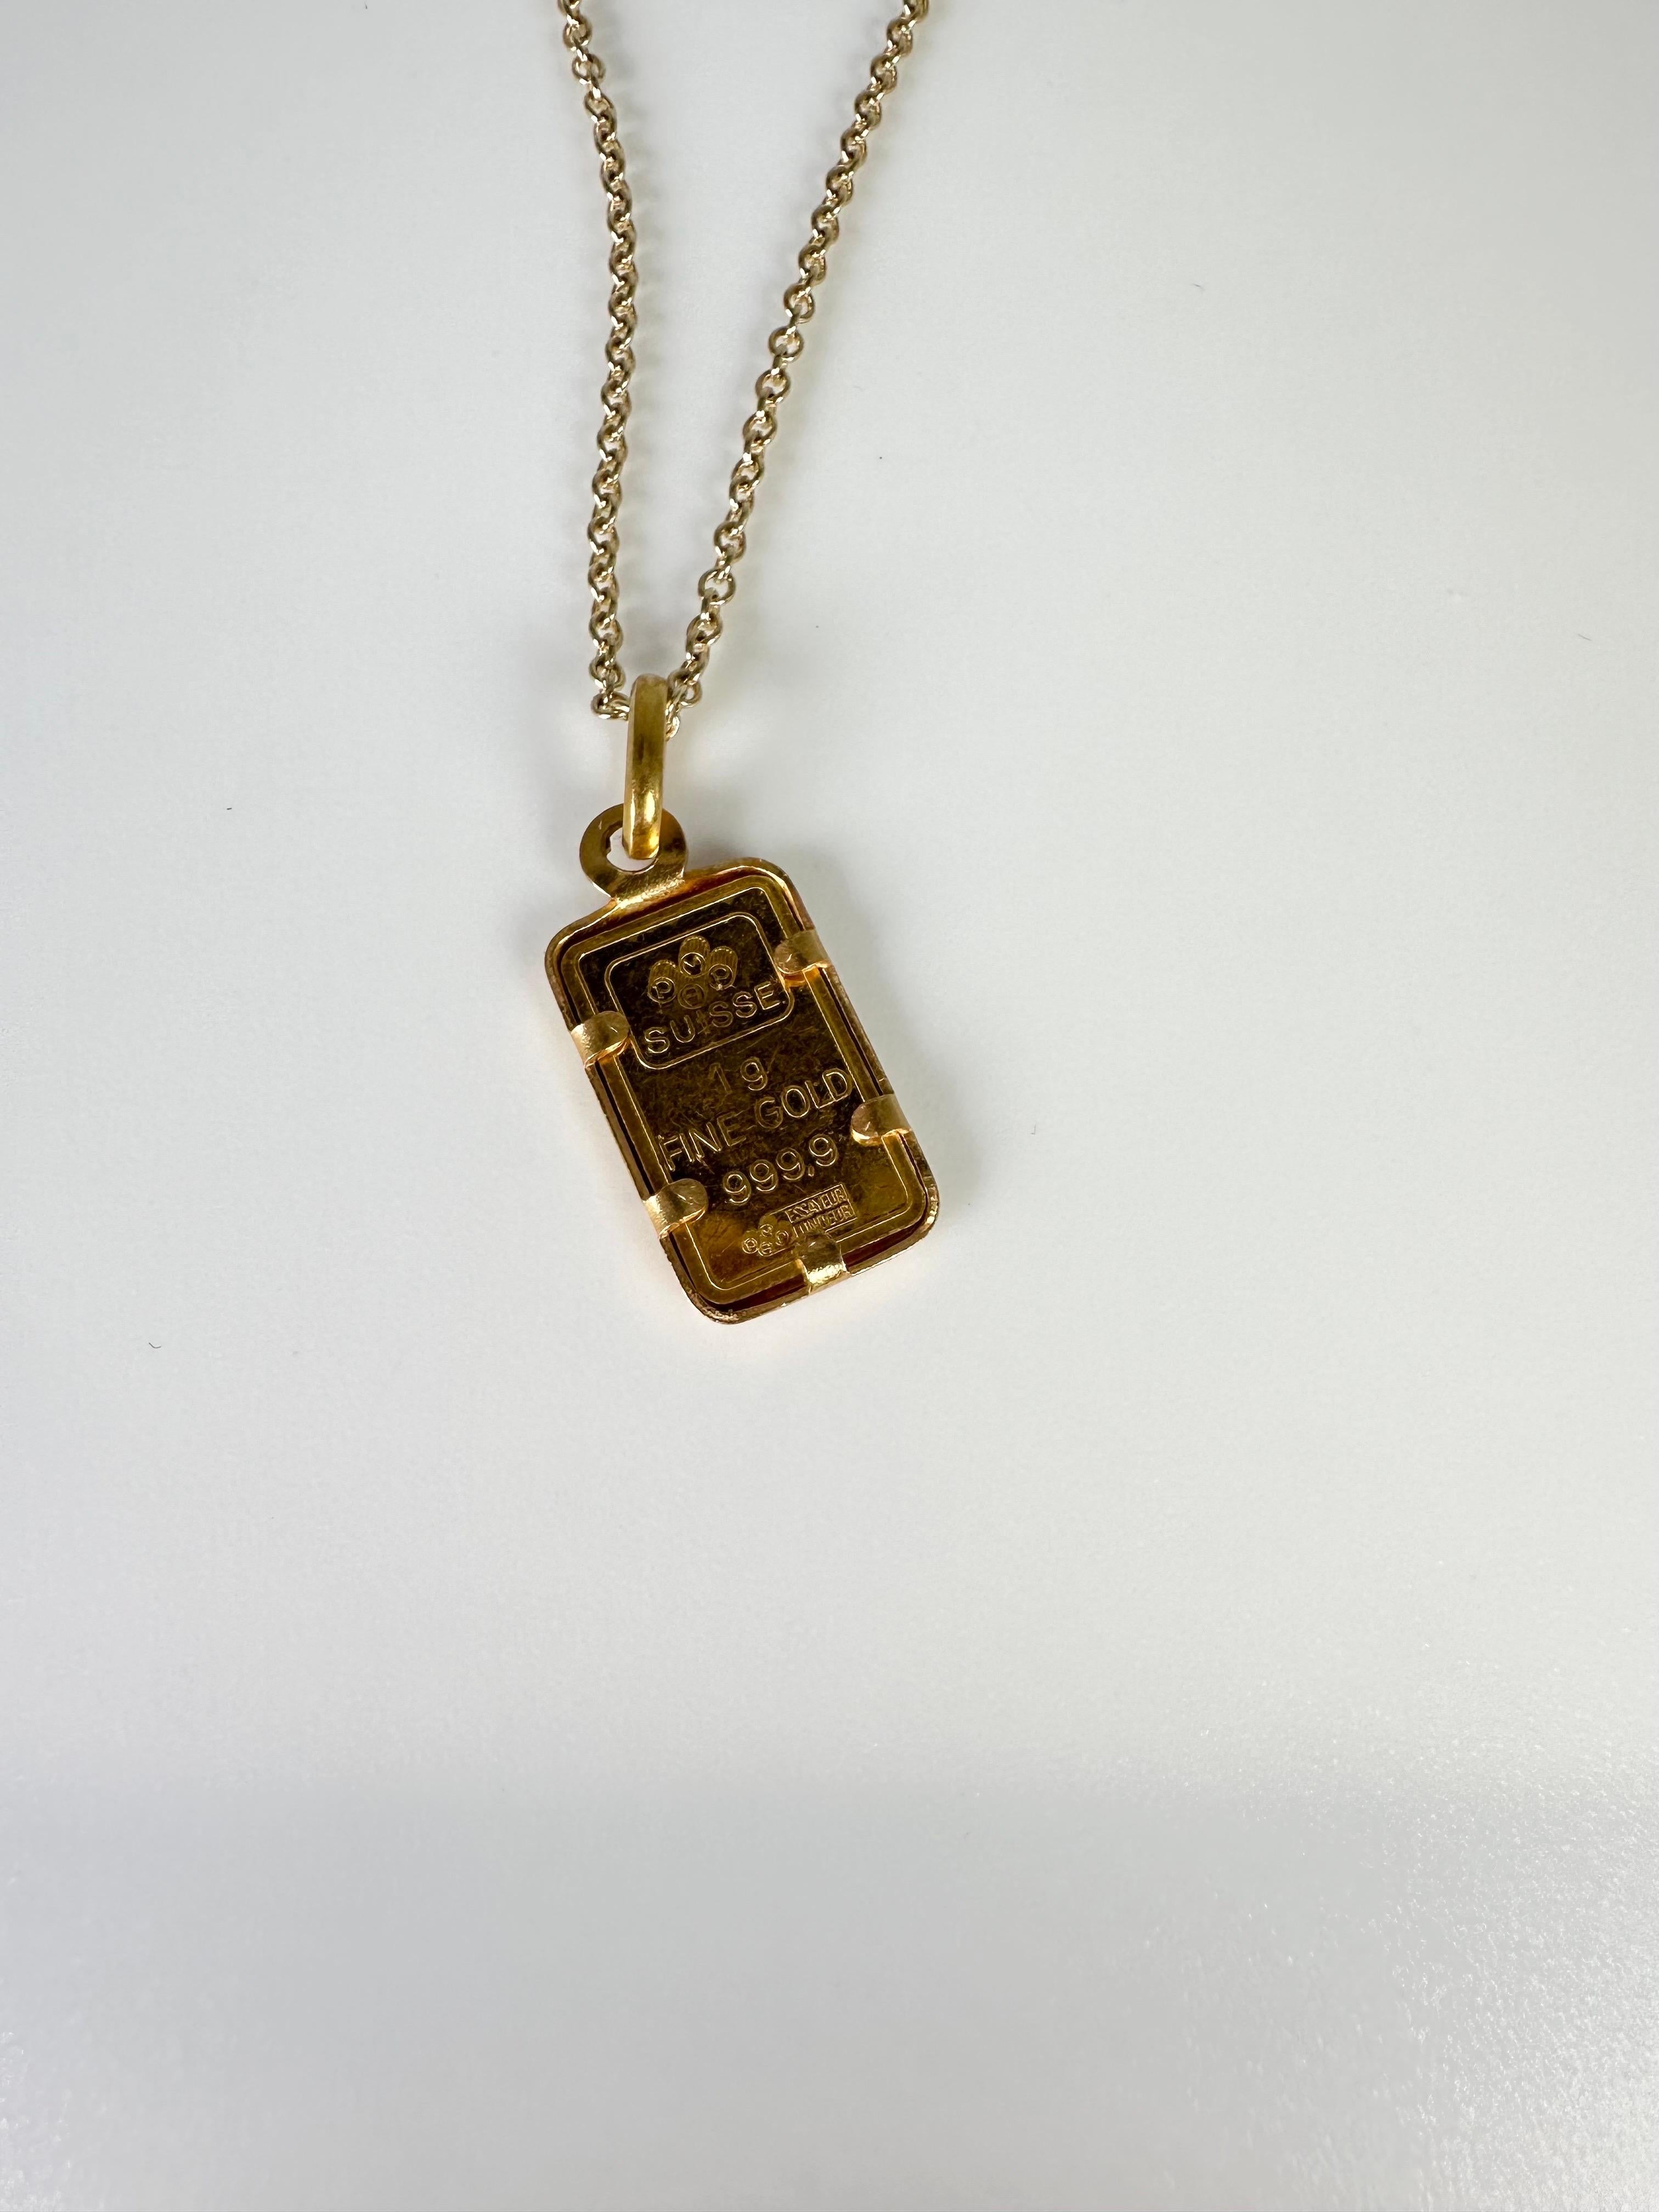 999 chain necklace